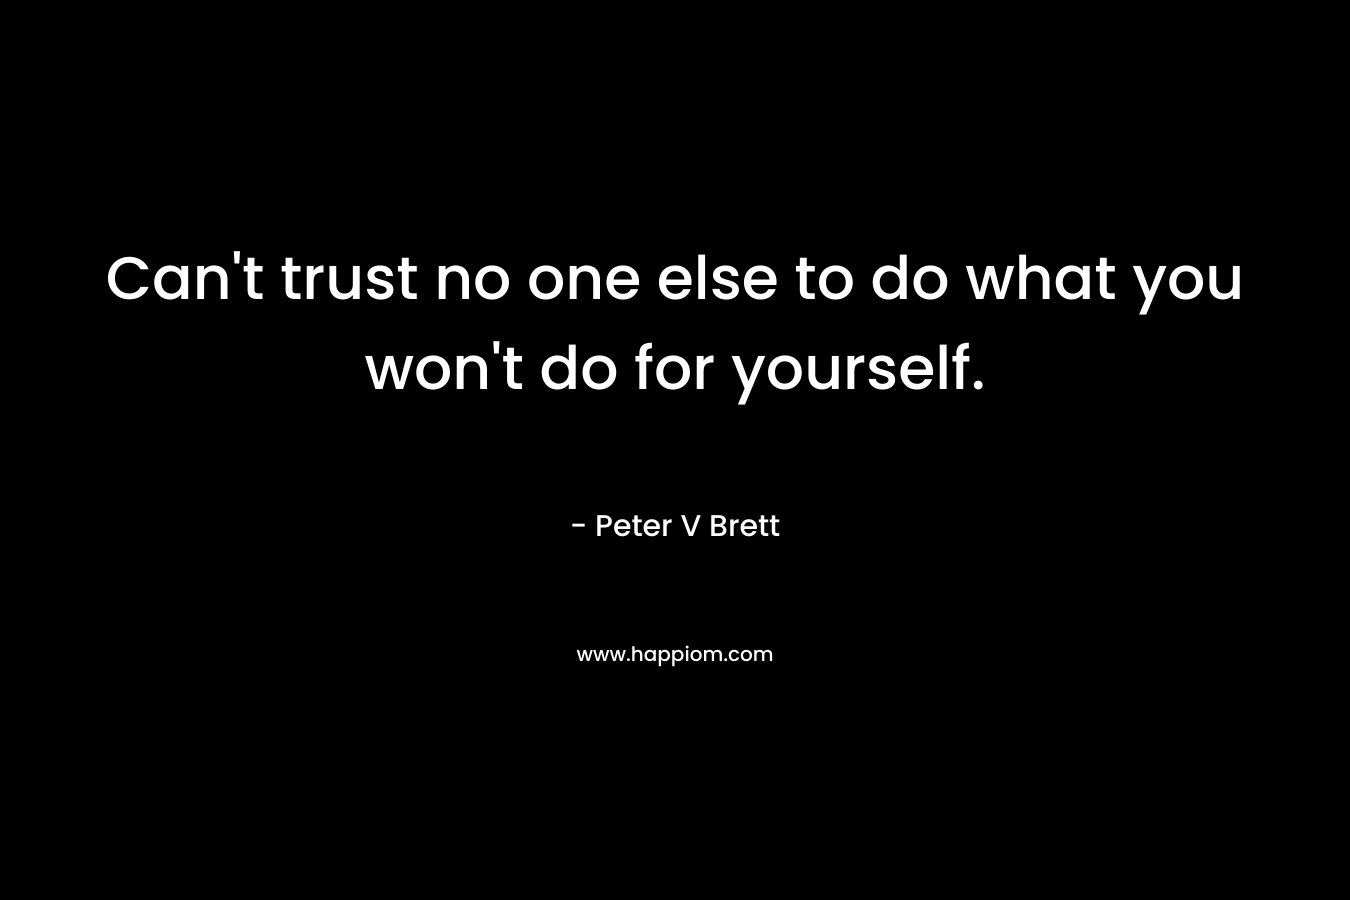 Can’t trust no one else to do what you won’t do for yourself. – Peter V Brett